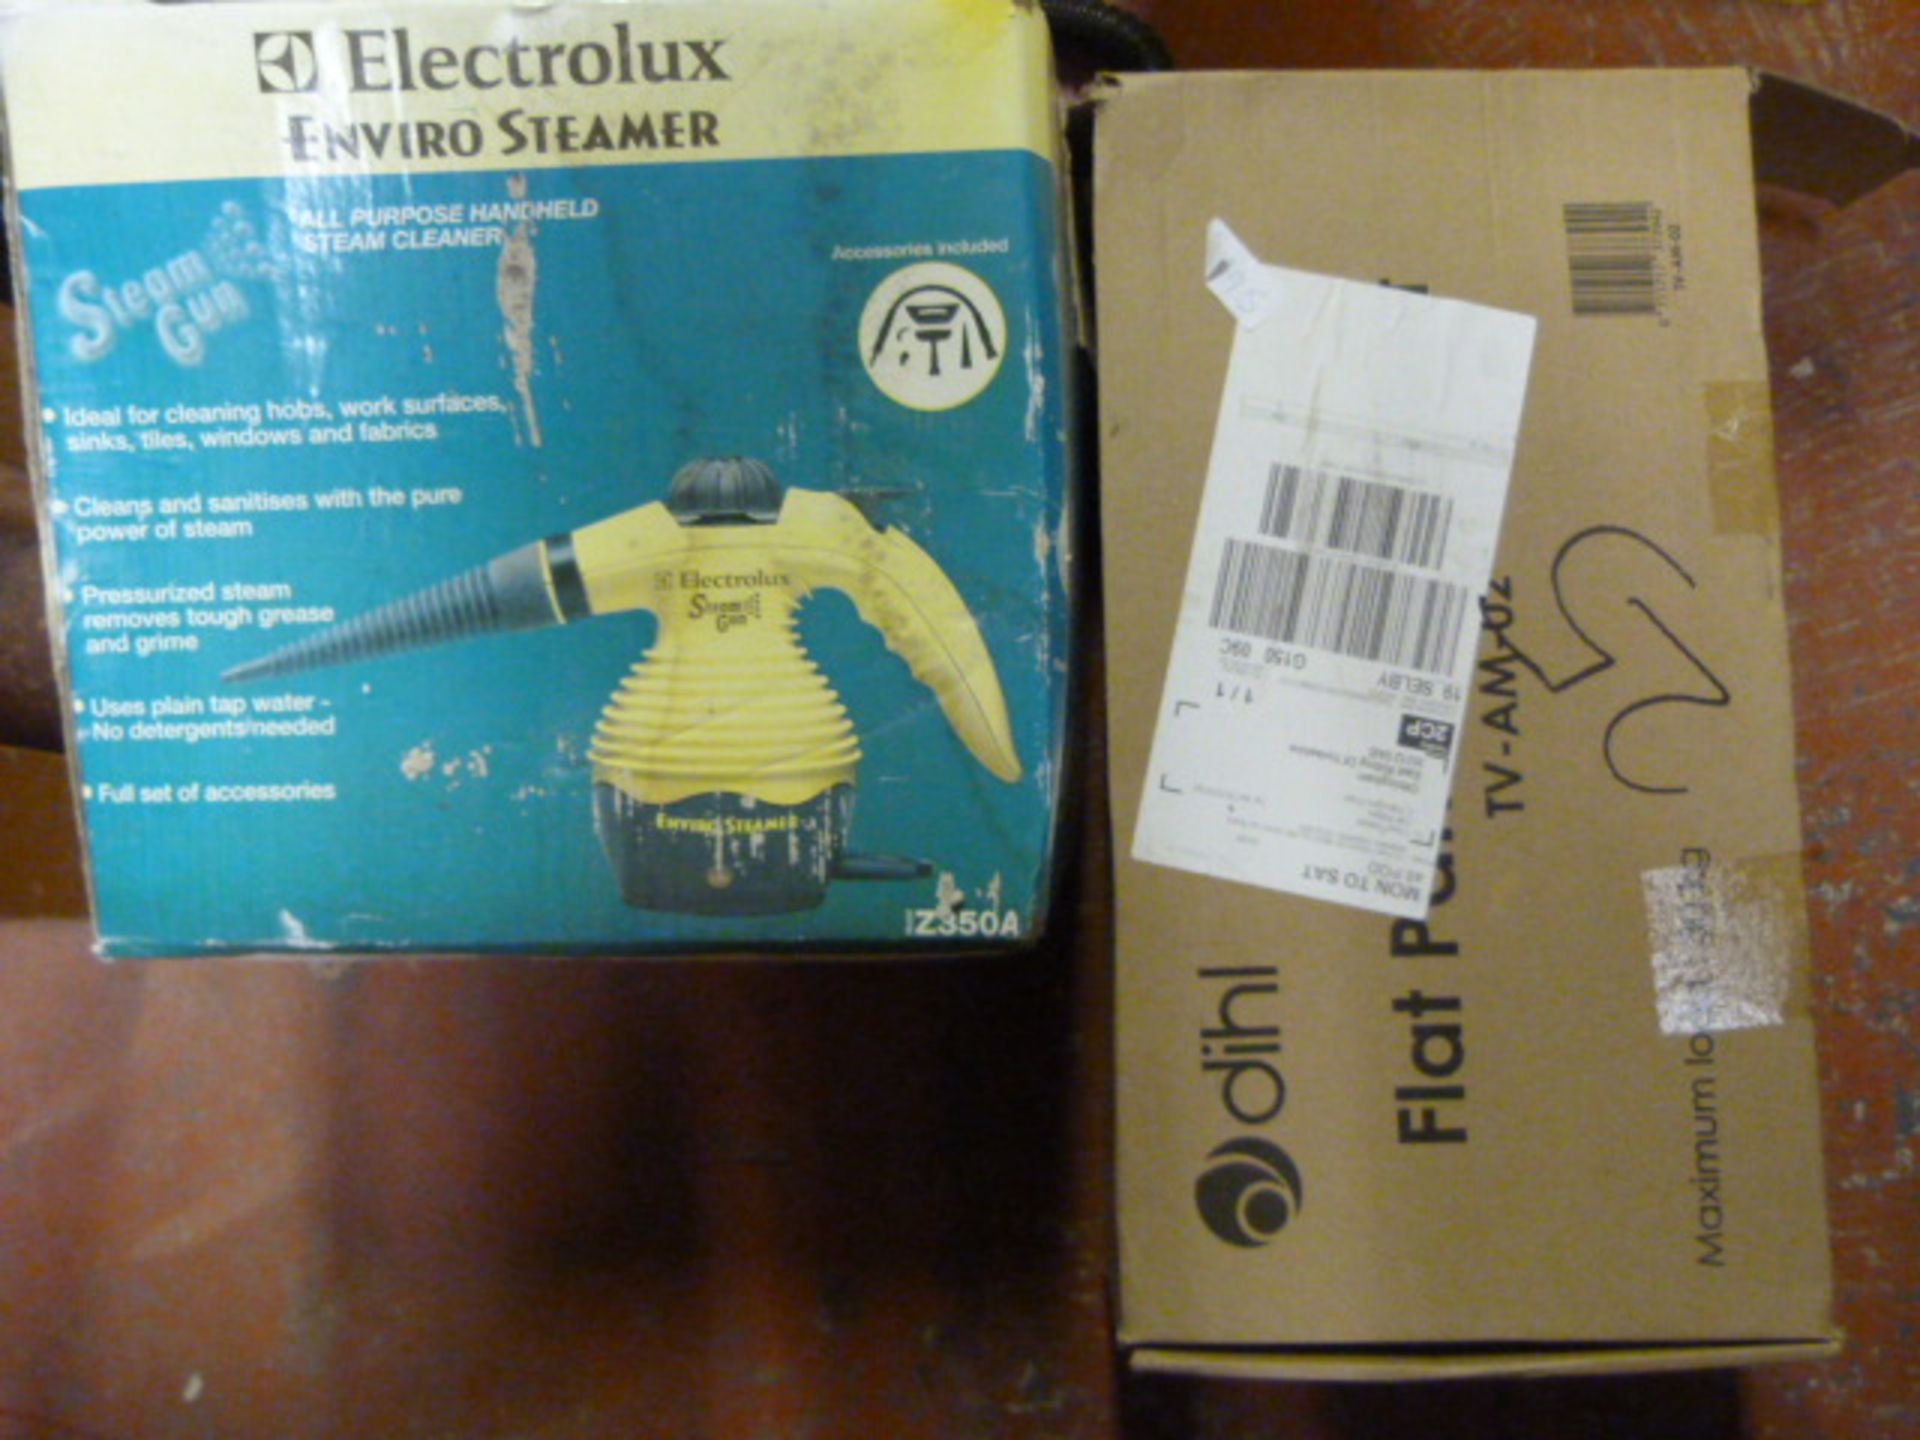 Electrolux Steam Cleaner and a Flat Panel TV Mount